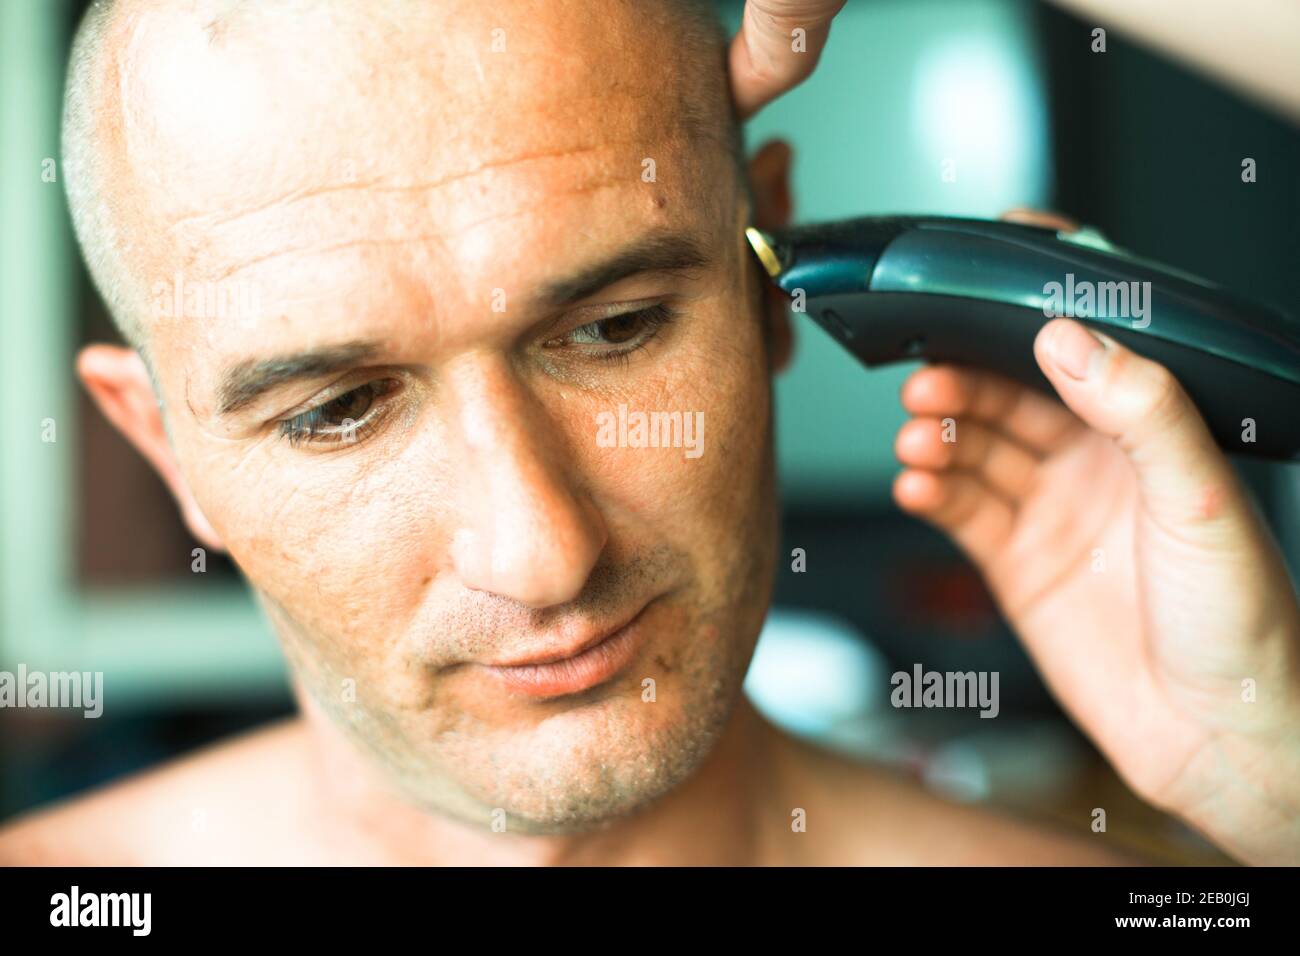 Hairdresser shaving man with hair trimmer. Close-up. Stock Photo